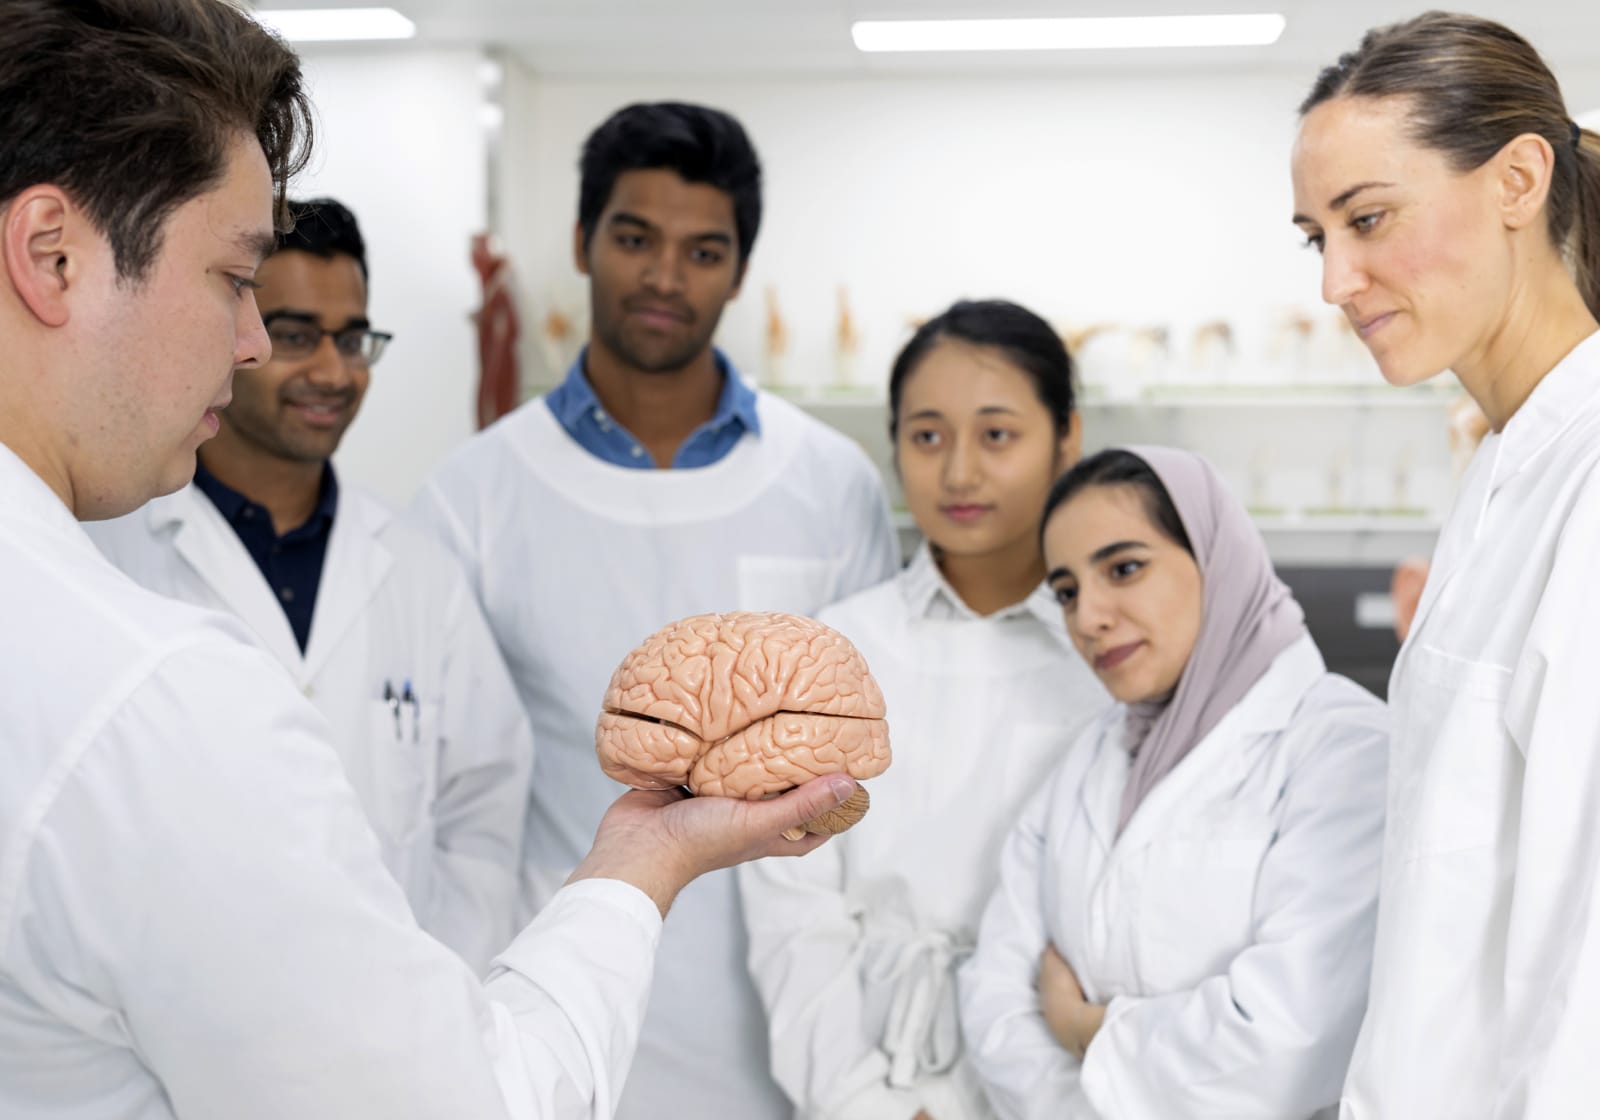 professor and group of students looking at a model of a brain